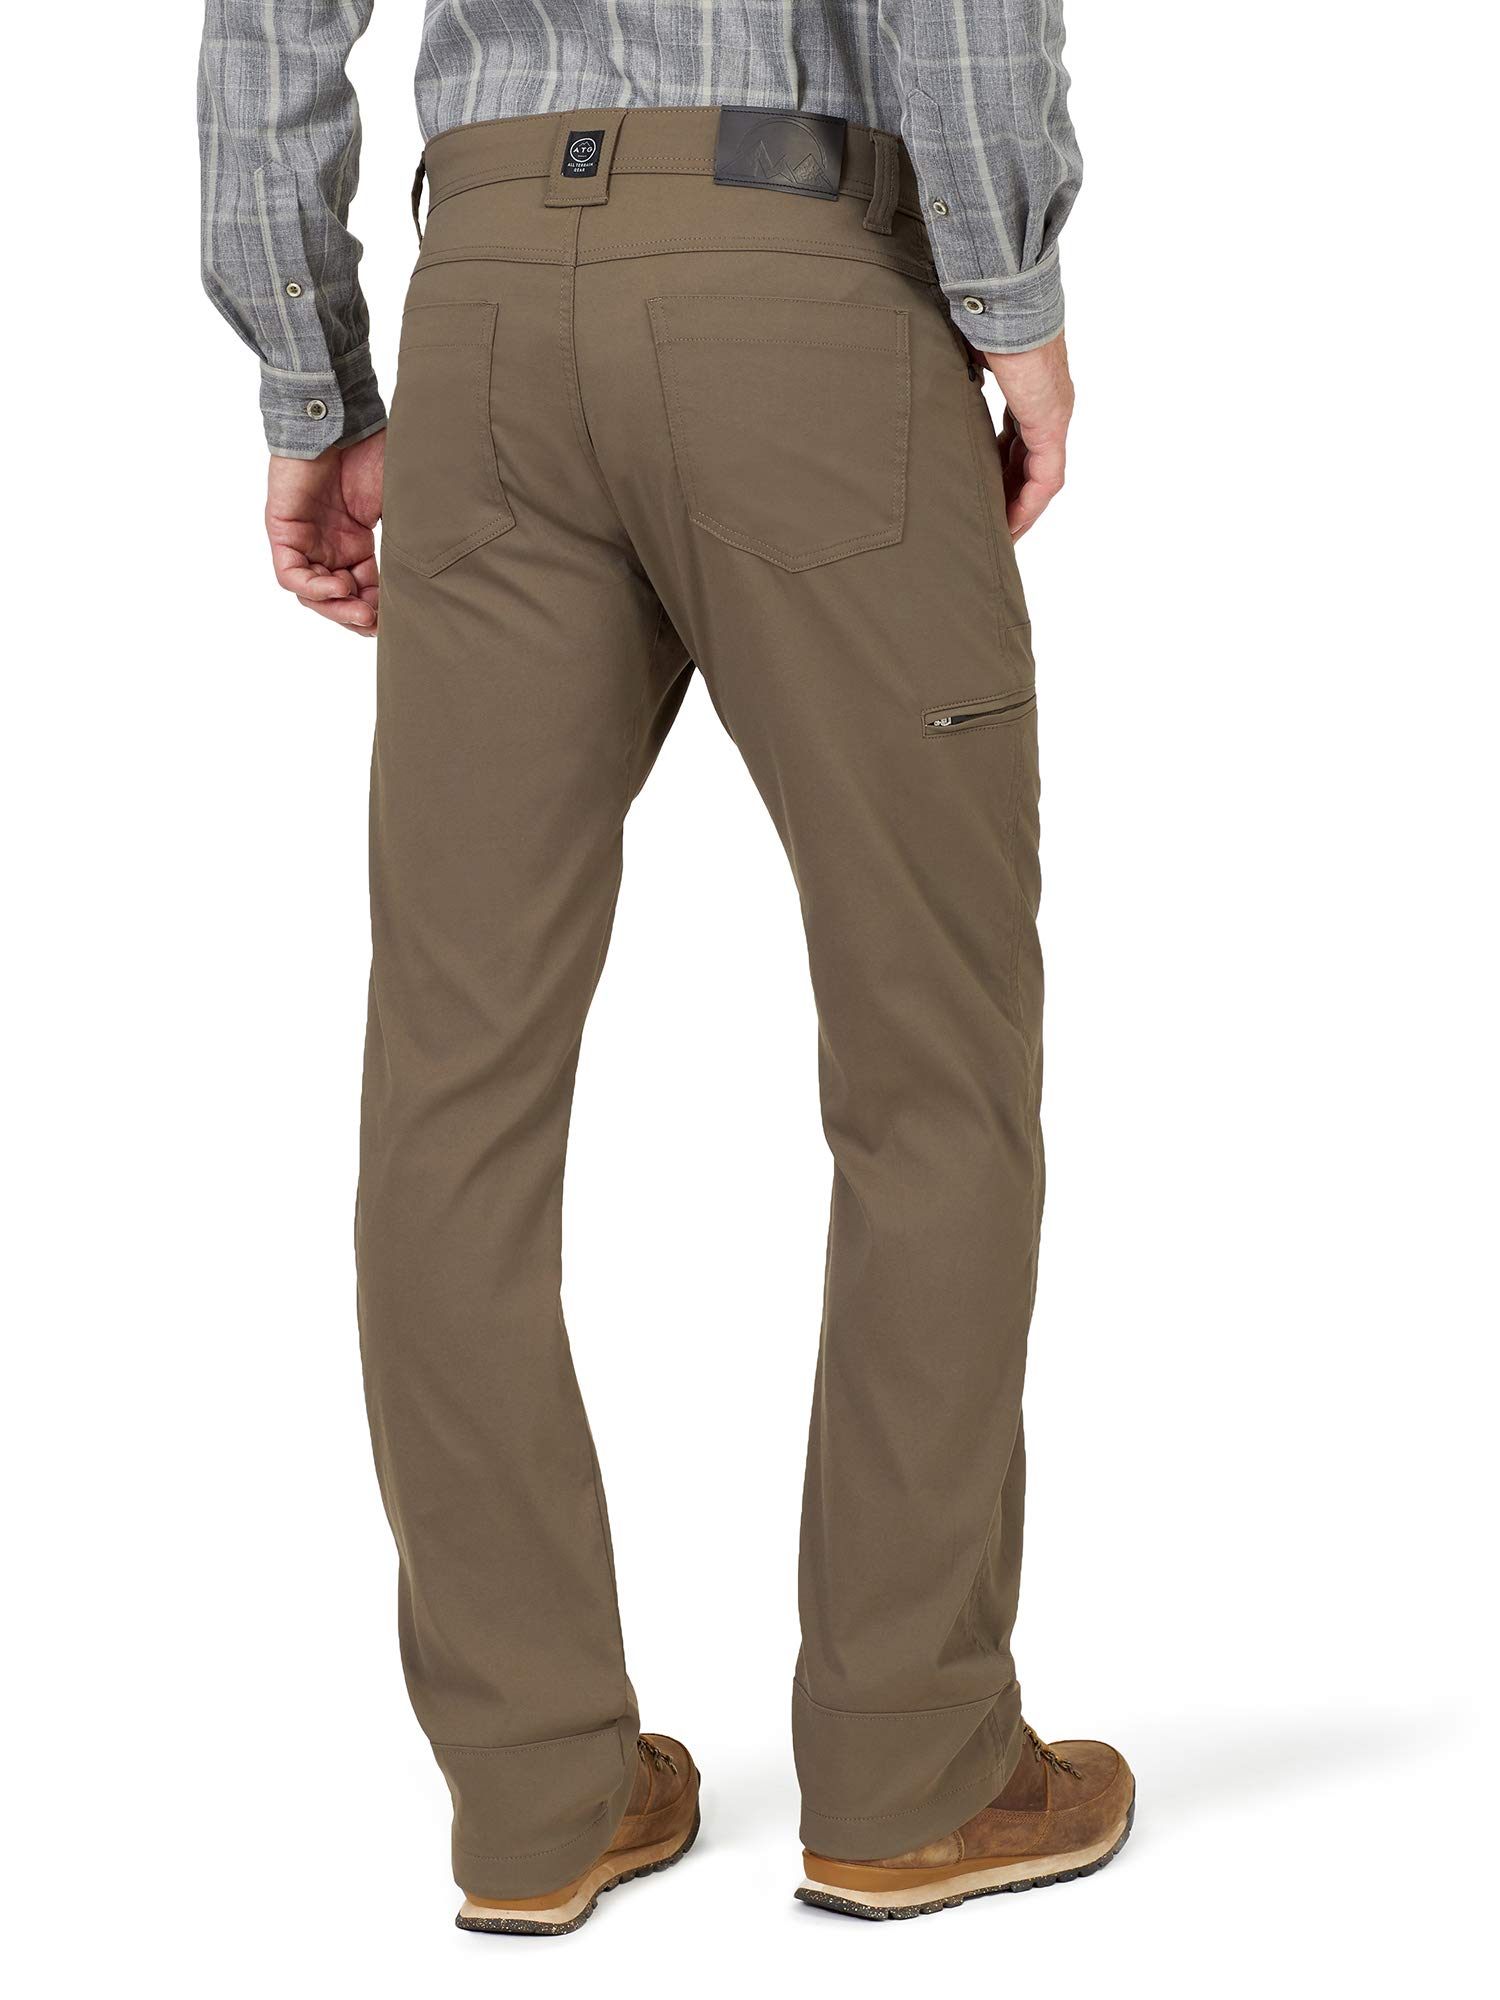 ATG by Wrangler Men's Synthetic Utility Pant